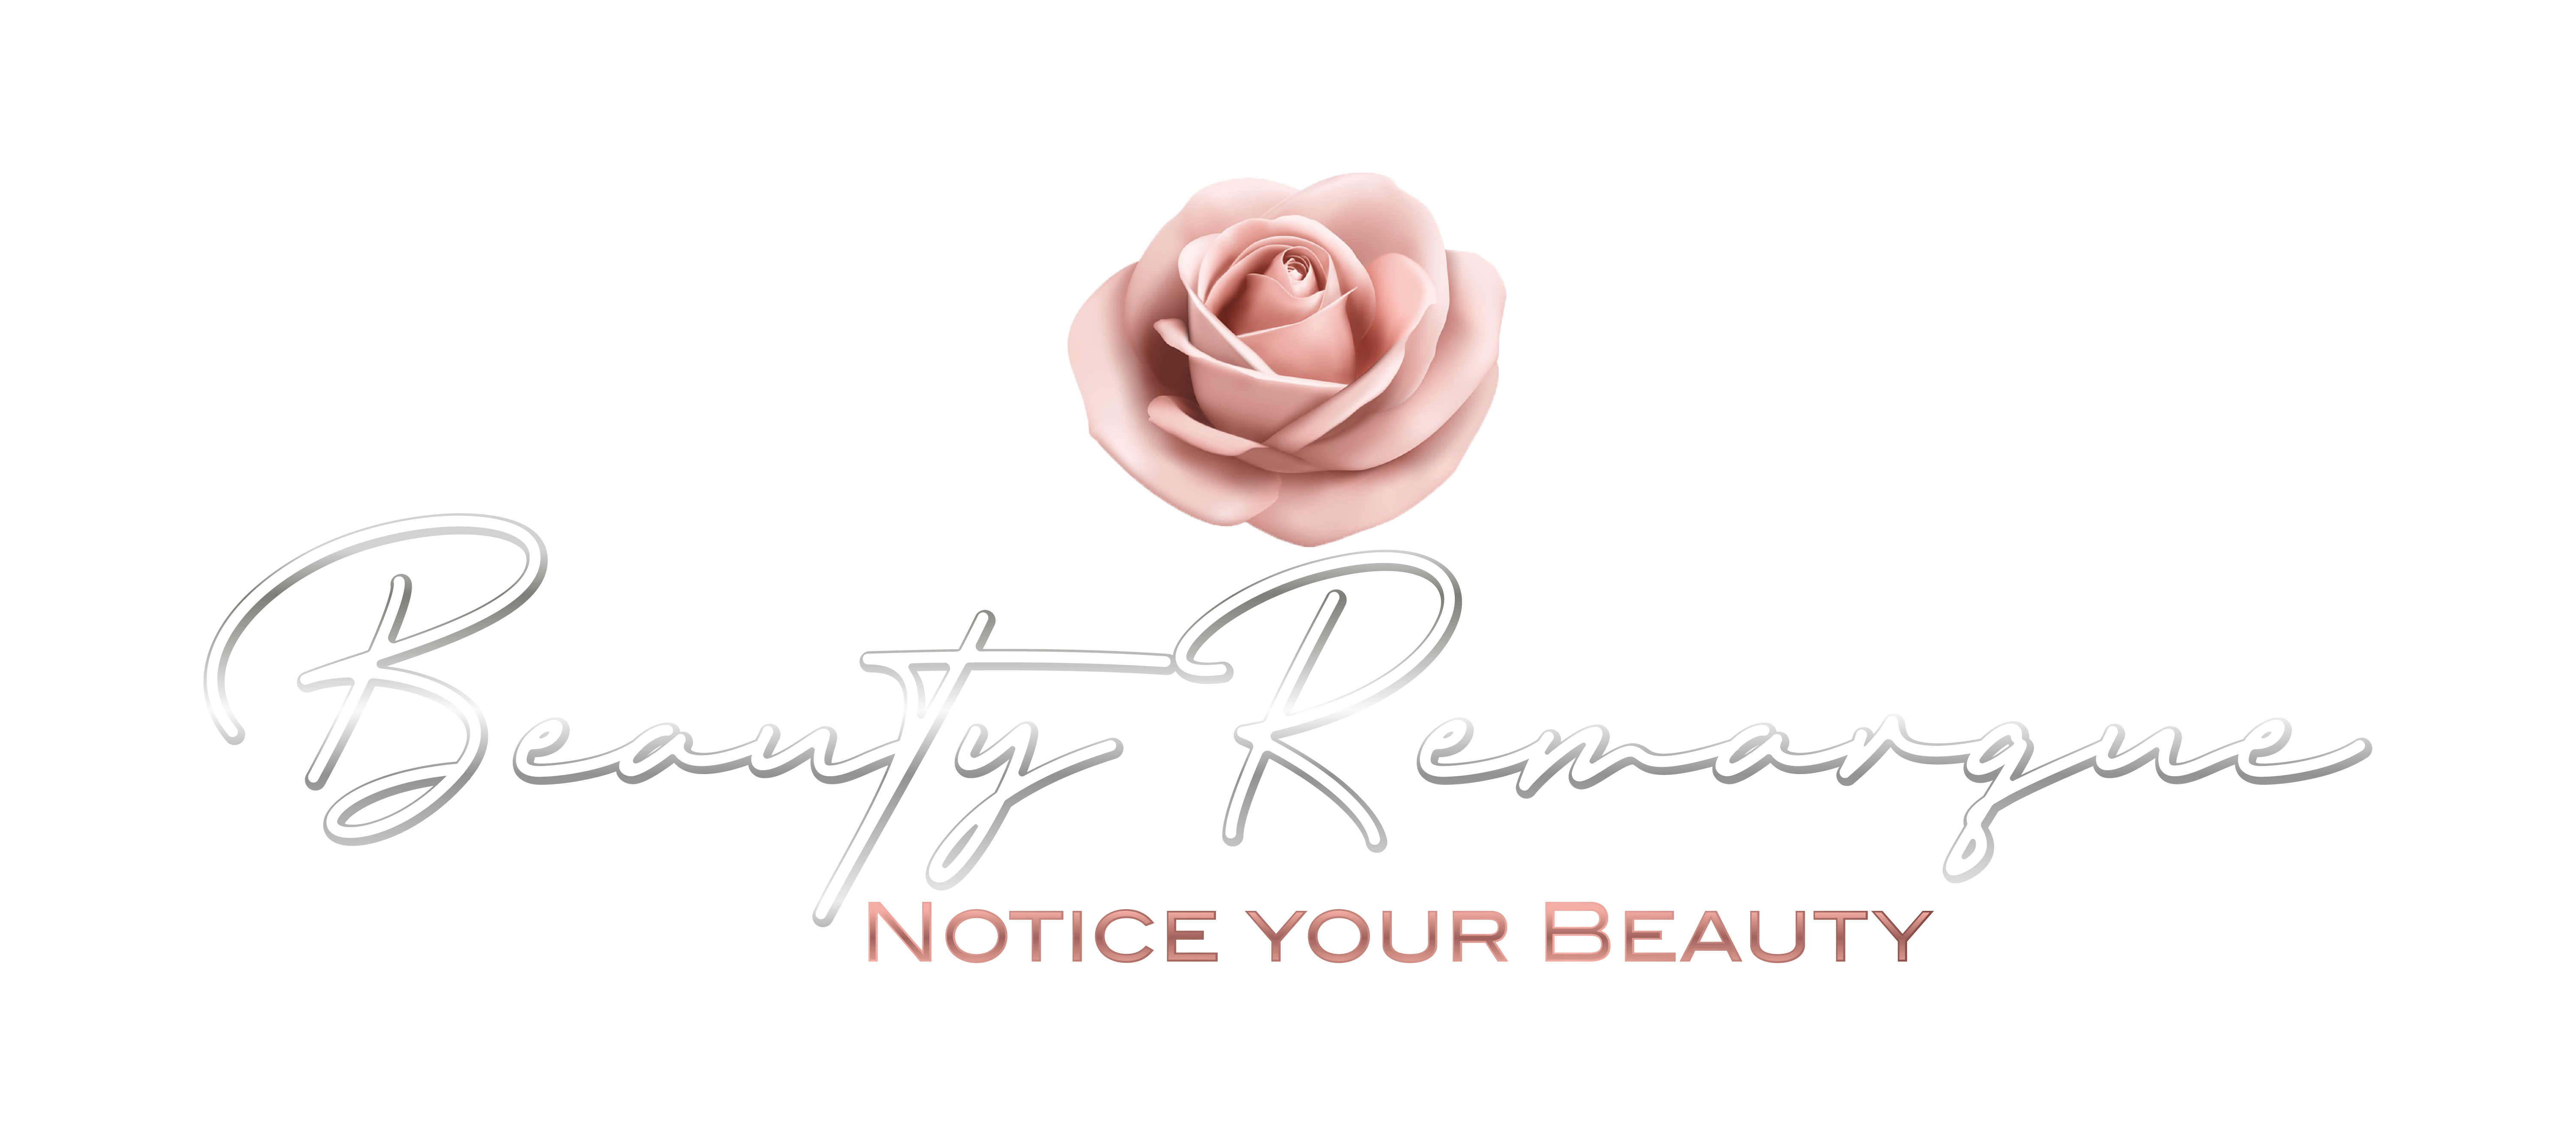 beauty remarque 